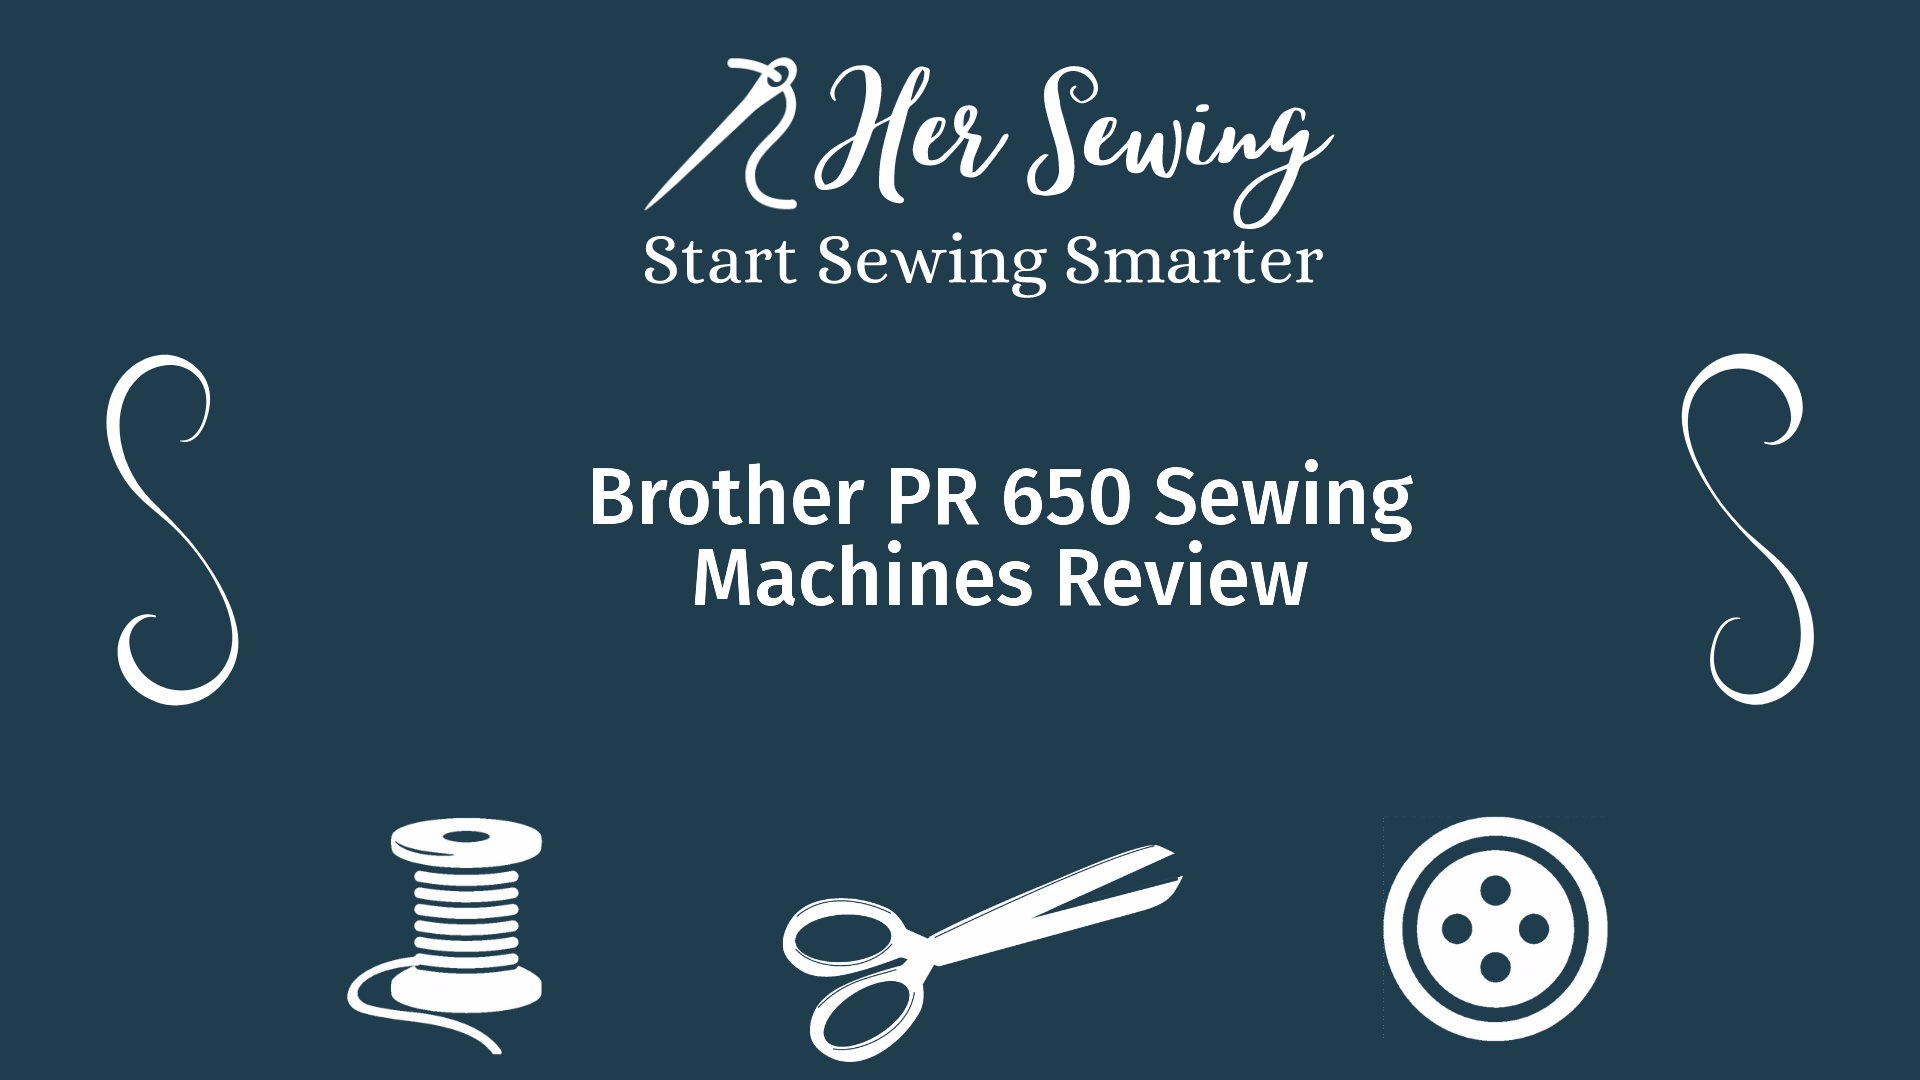 Brother PR 650 Sewing Machines Review